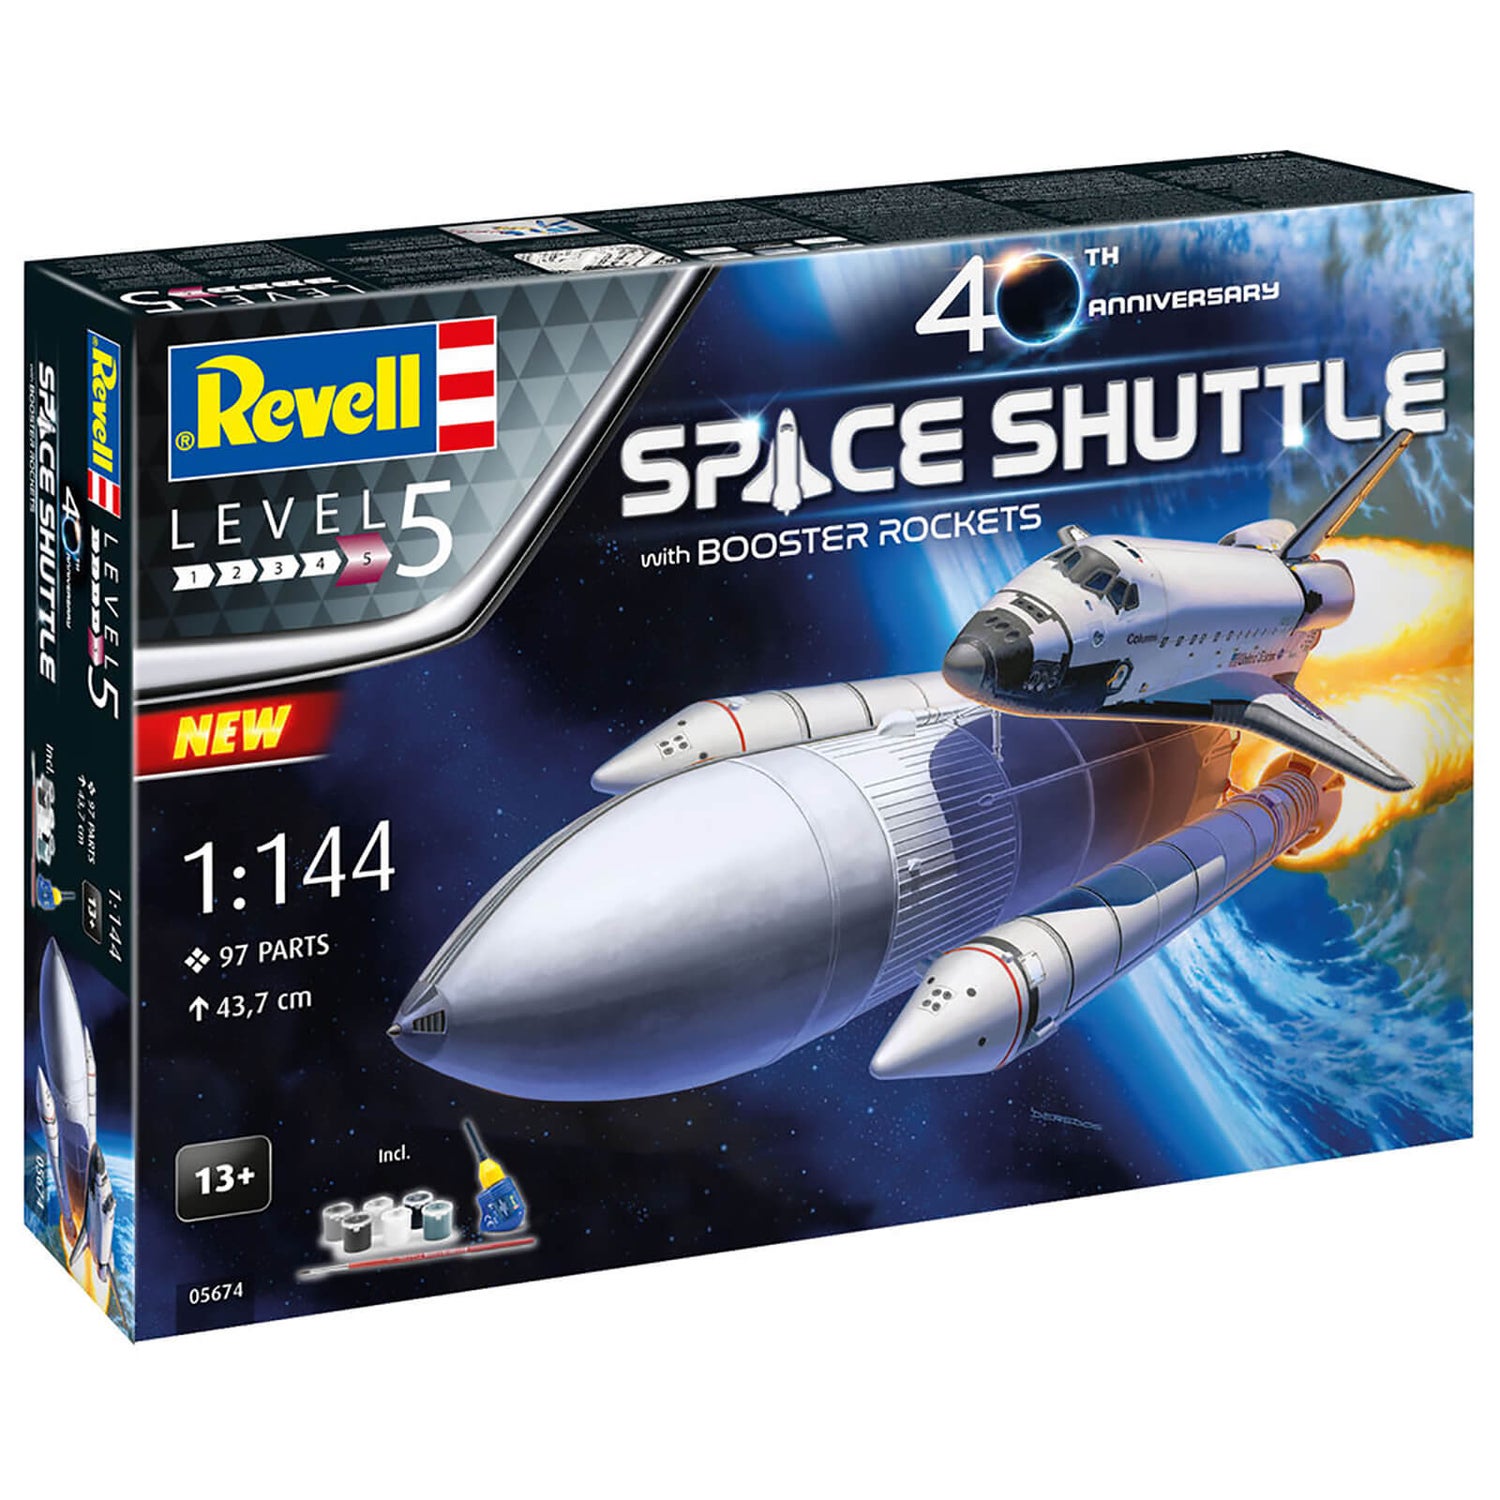 Revell Nasa Space Shuttle & Boosters 40th Anniversary Gift Set 1:144 Scale